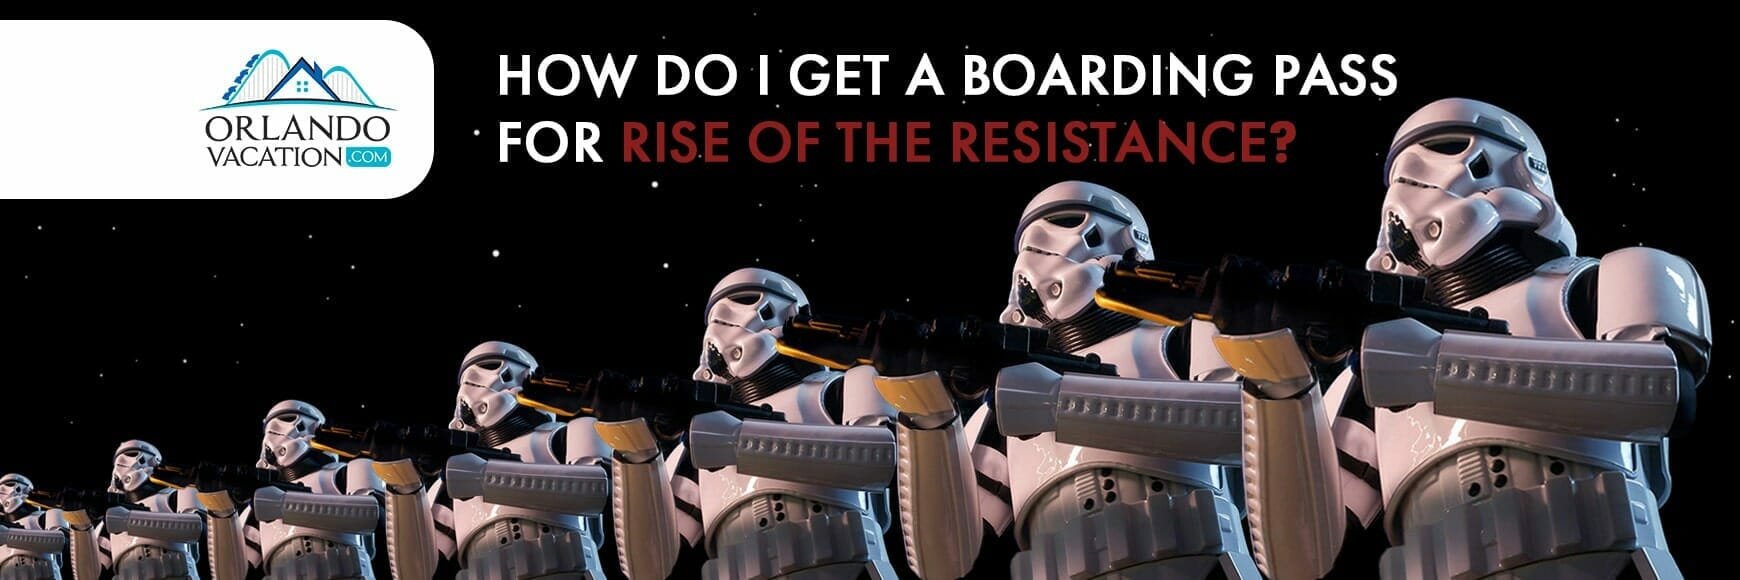 Storm Troopers at Rise of the Resistance